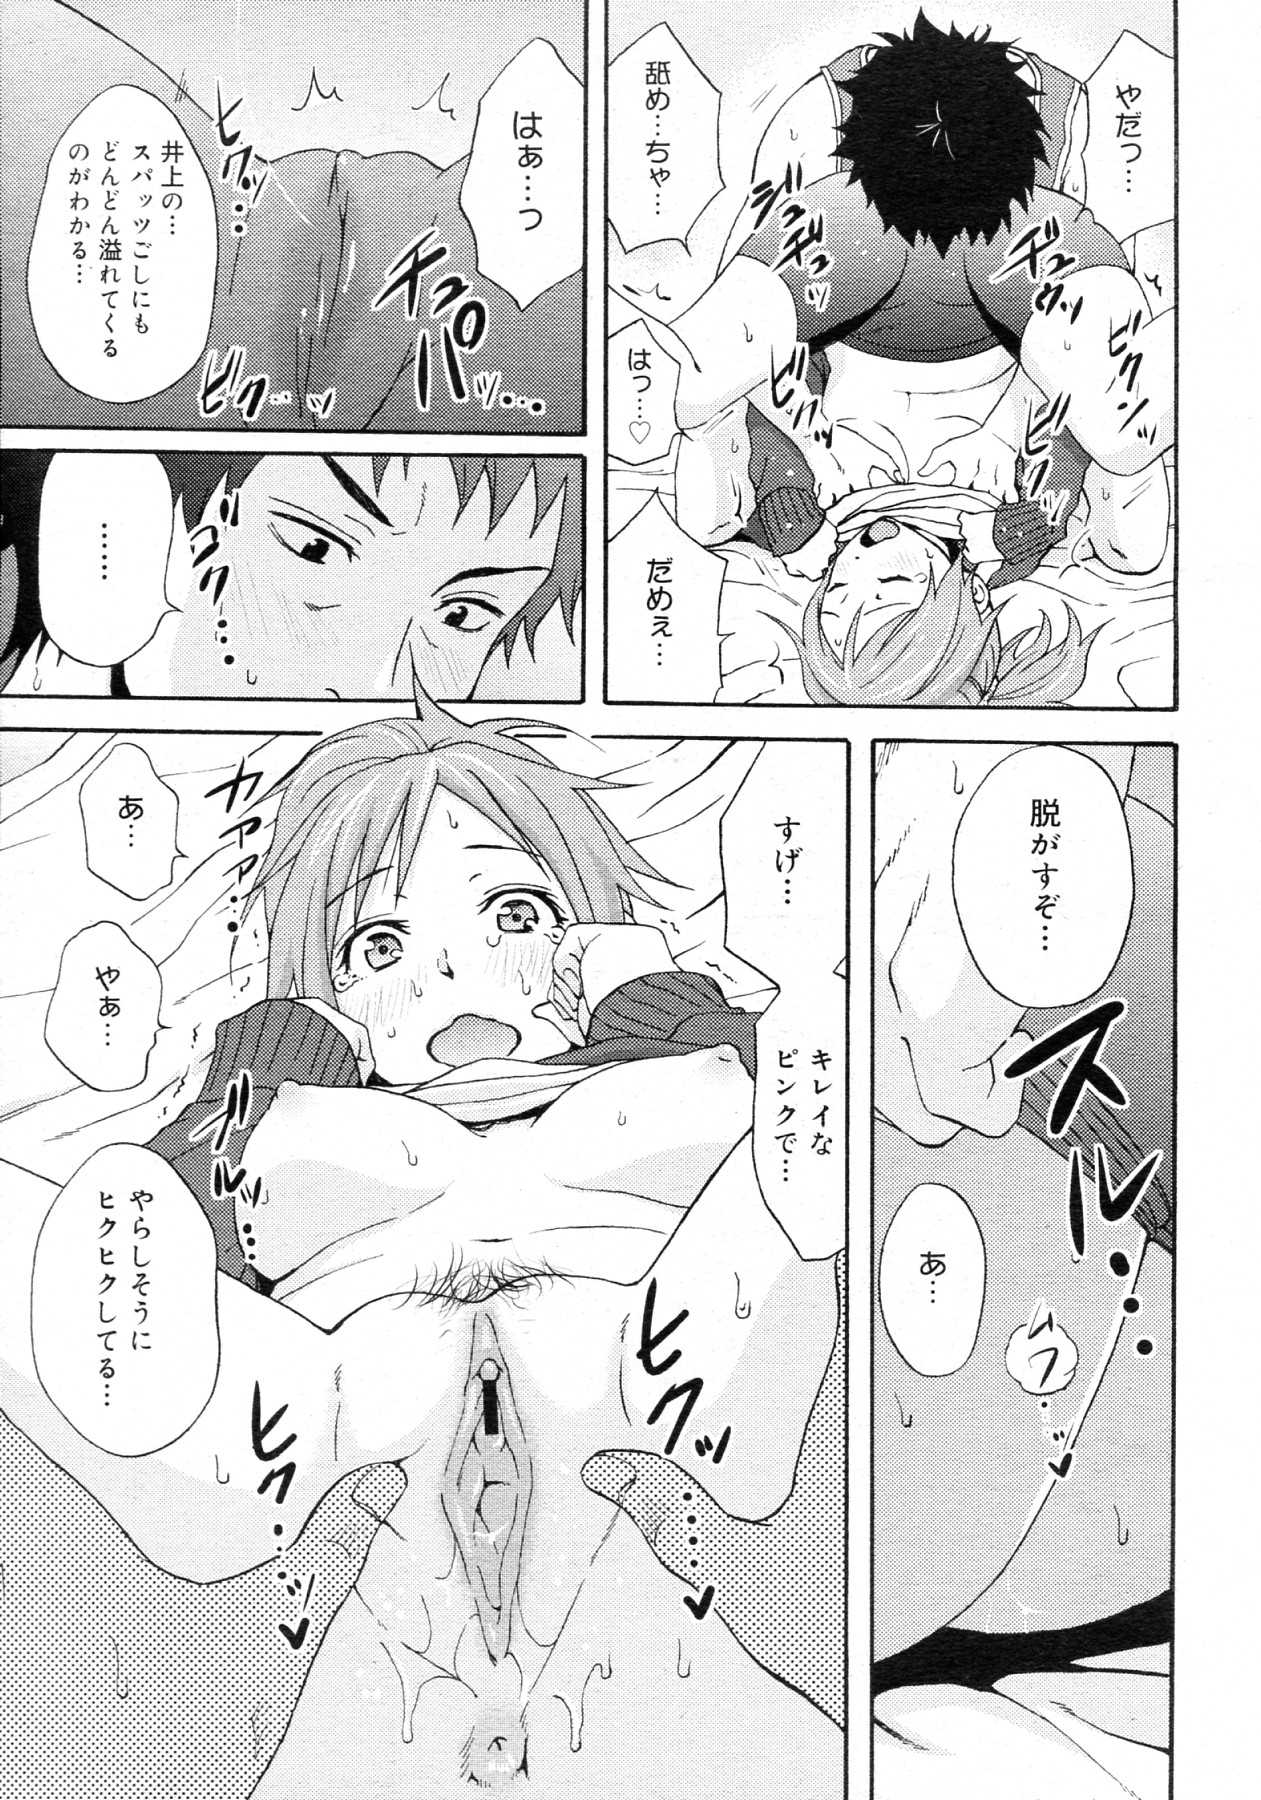 [Coelacanth] JOINT (COMIC Megamilk Vol.14) [しーらかんす] JOINT (コミックメガミルク Vol.14)